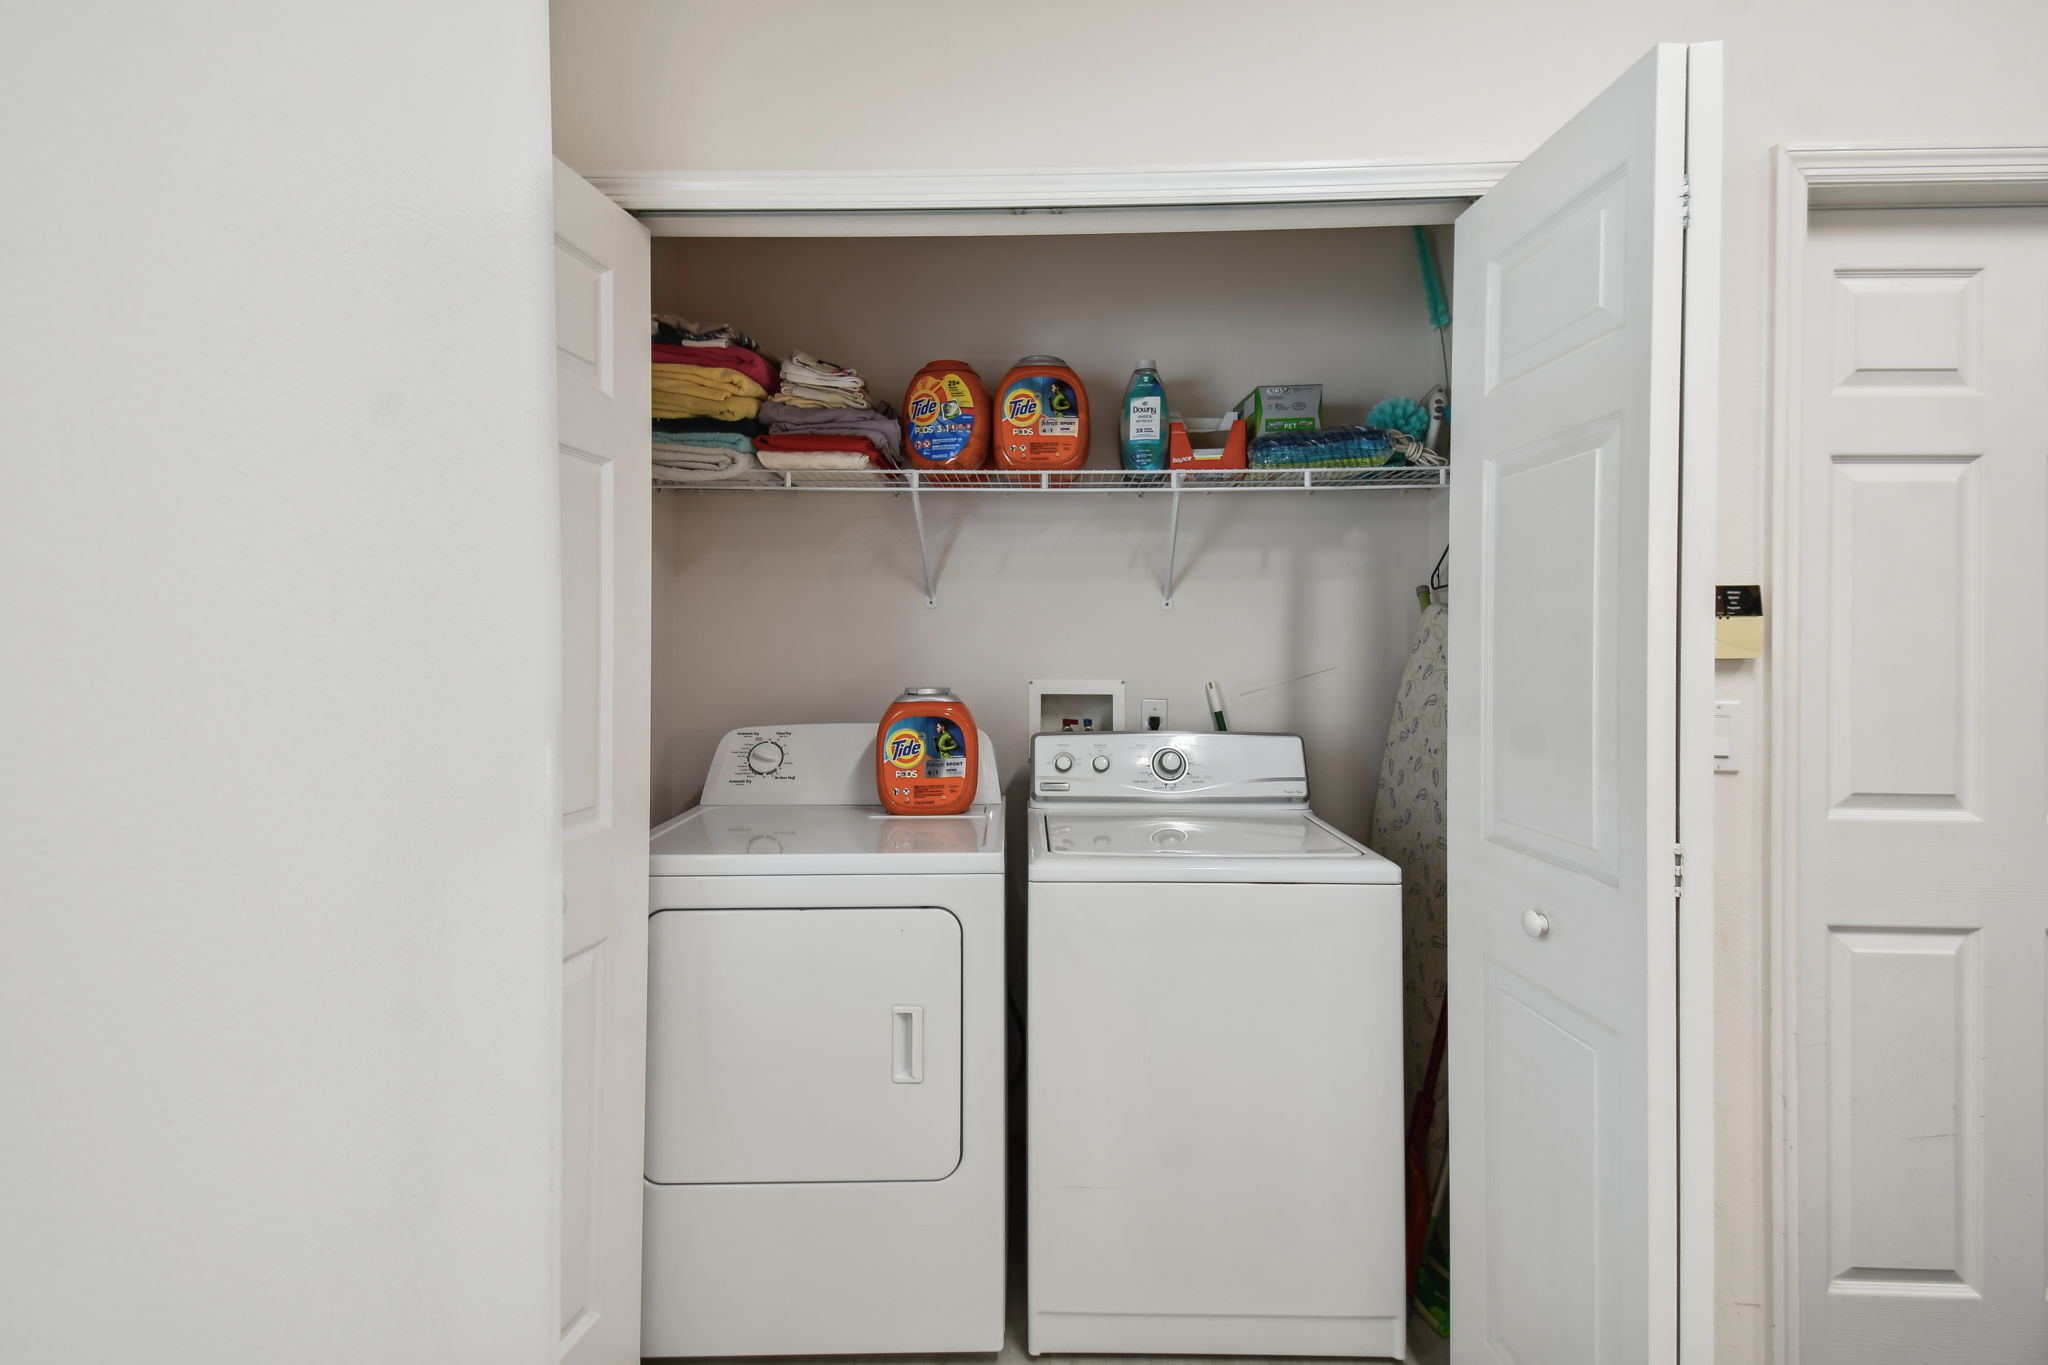 Laundry closet in the kitchen